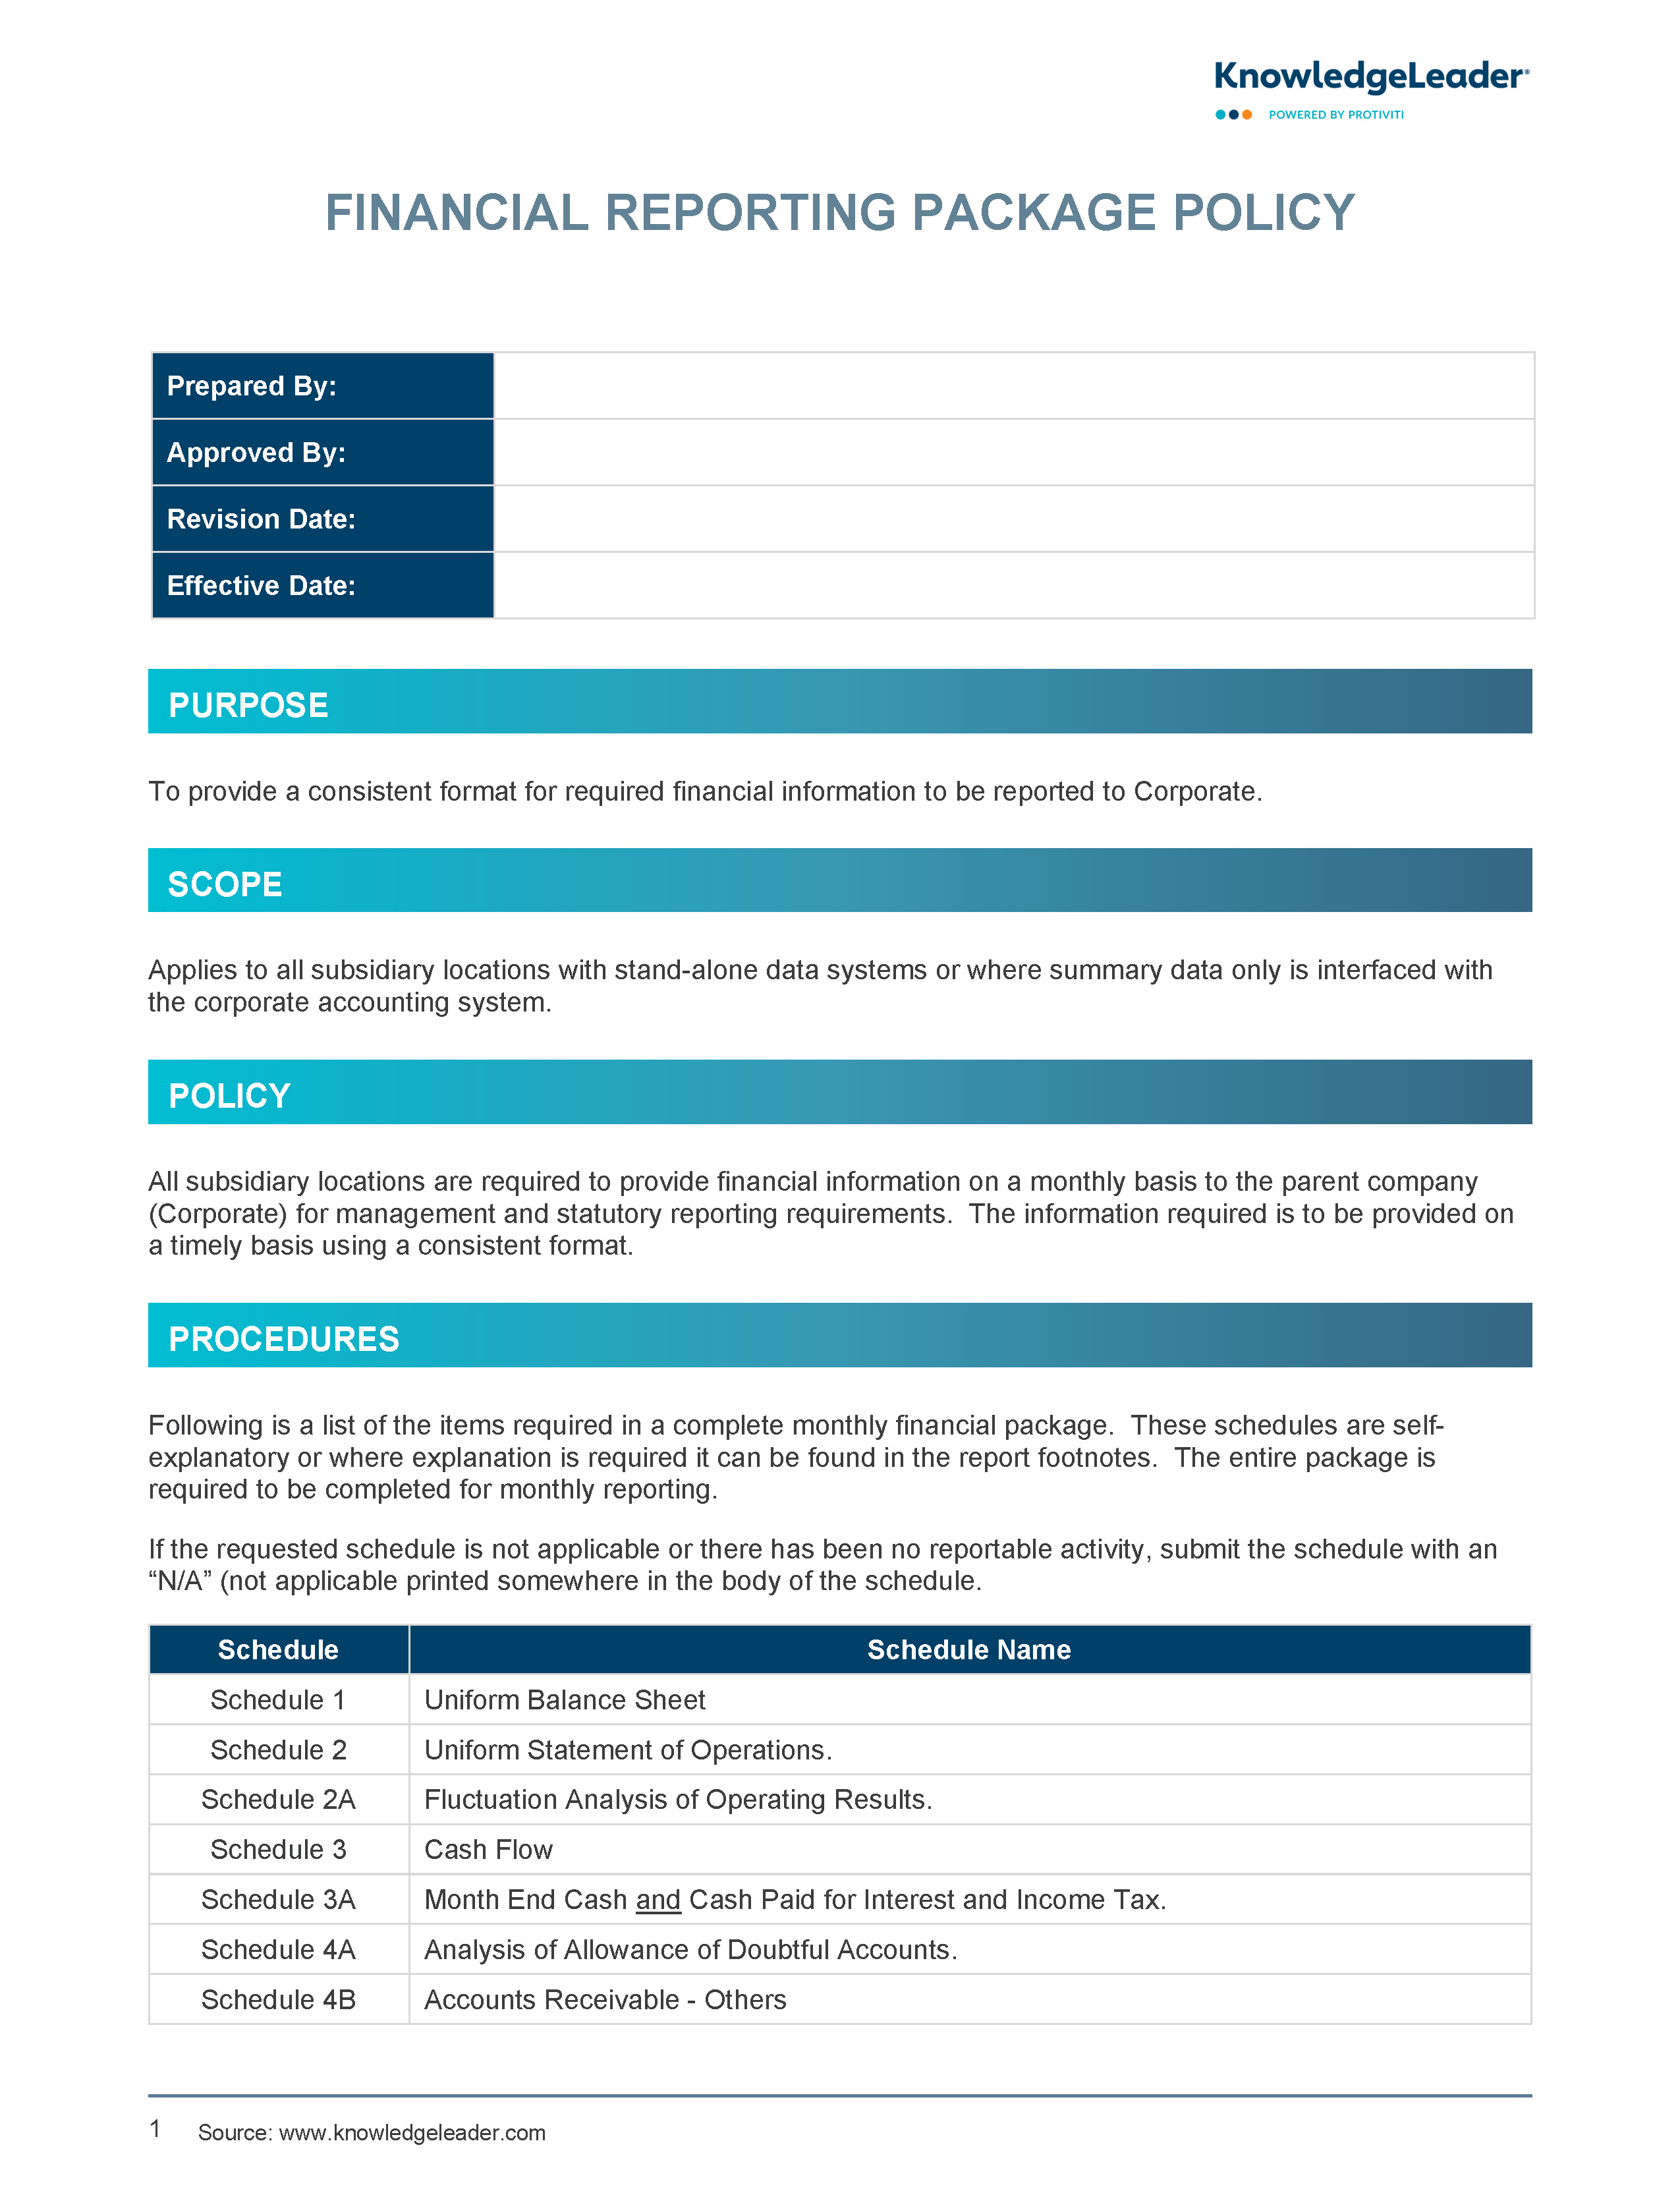 Screenshot of the first page of Financial Reporting Package Policy